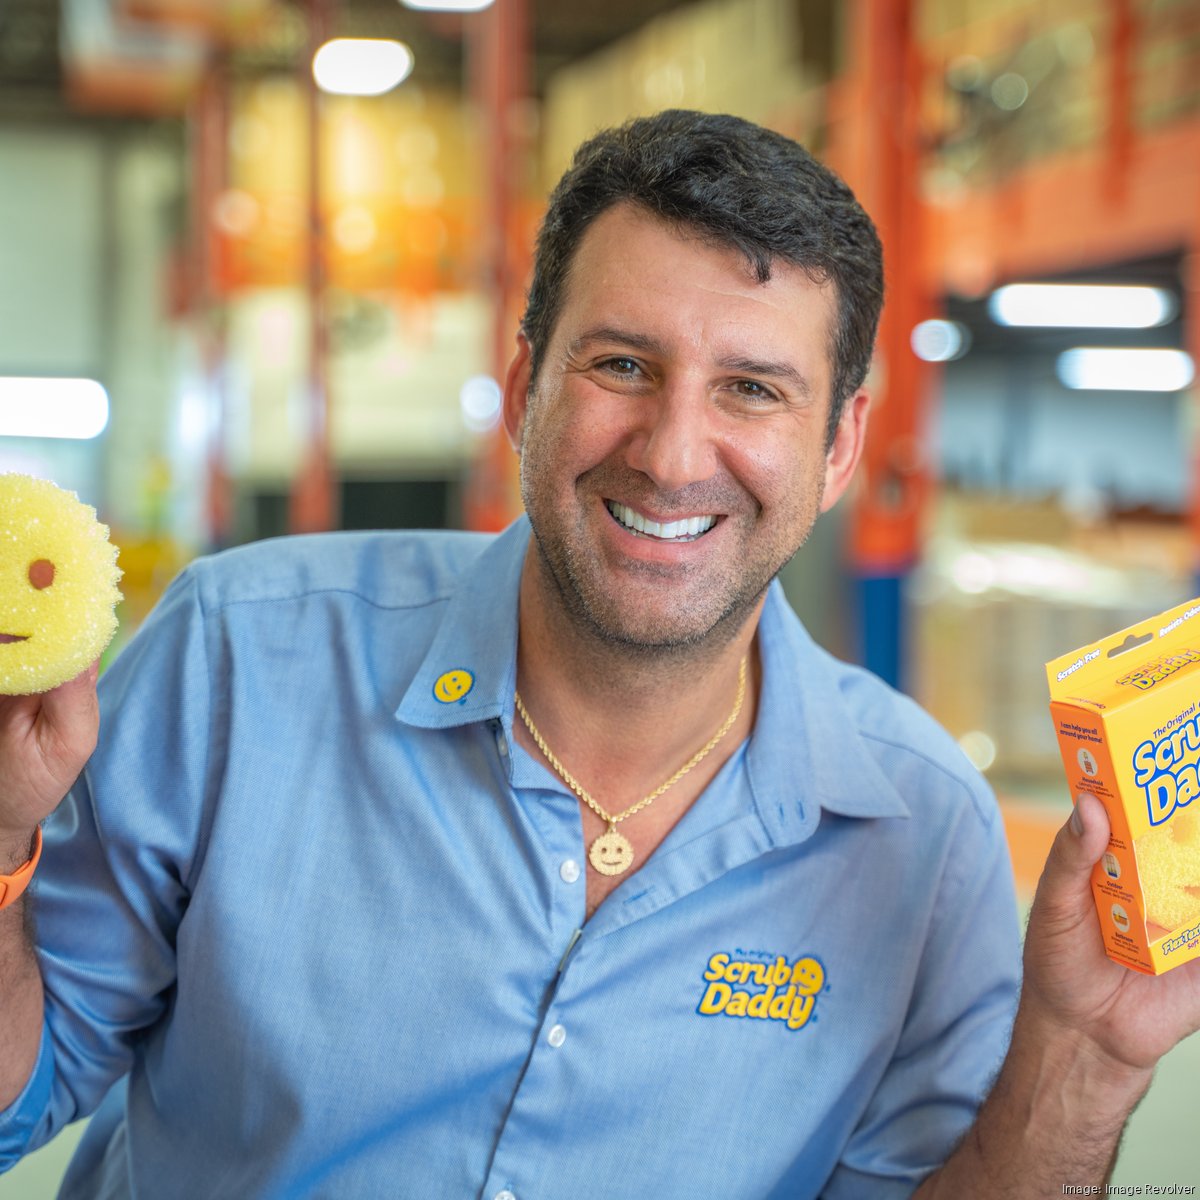 CEO of Shark Tank darling Scrub Daddy open to selling company